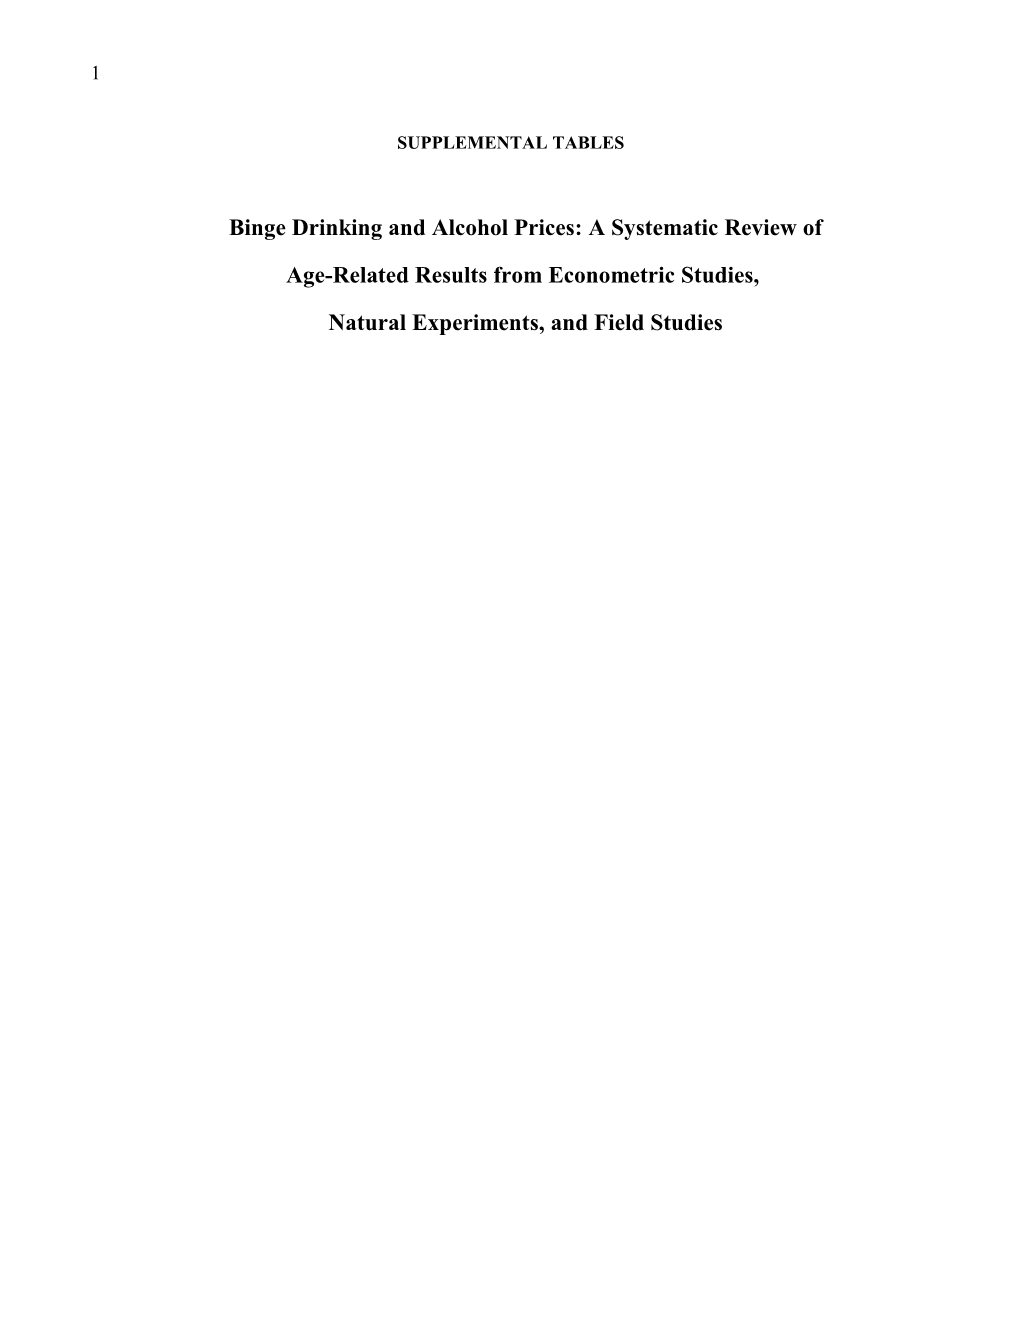 Binge Drinking and Alcohol Prices: a Systematic Review Of